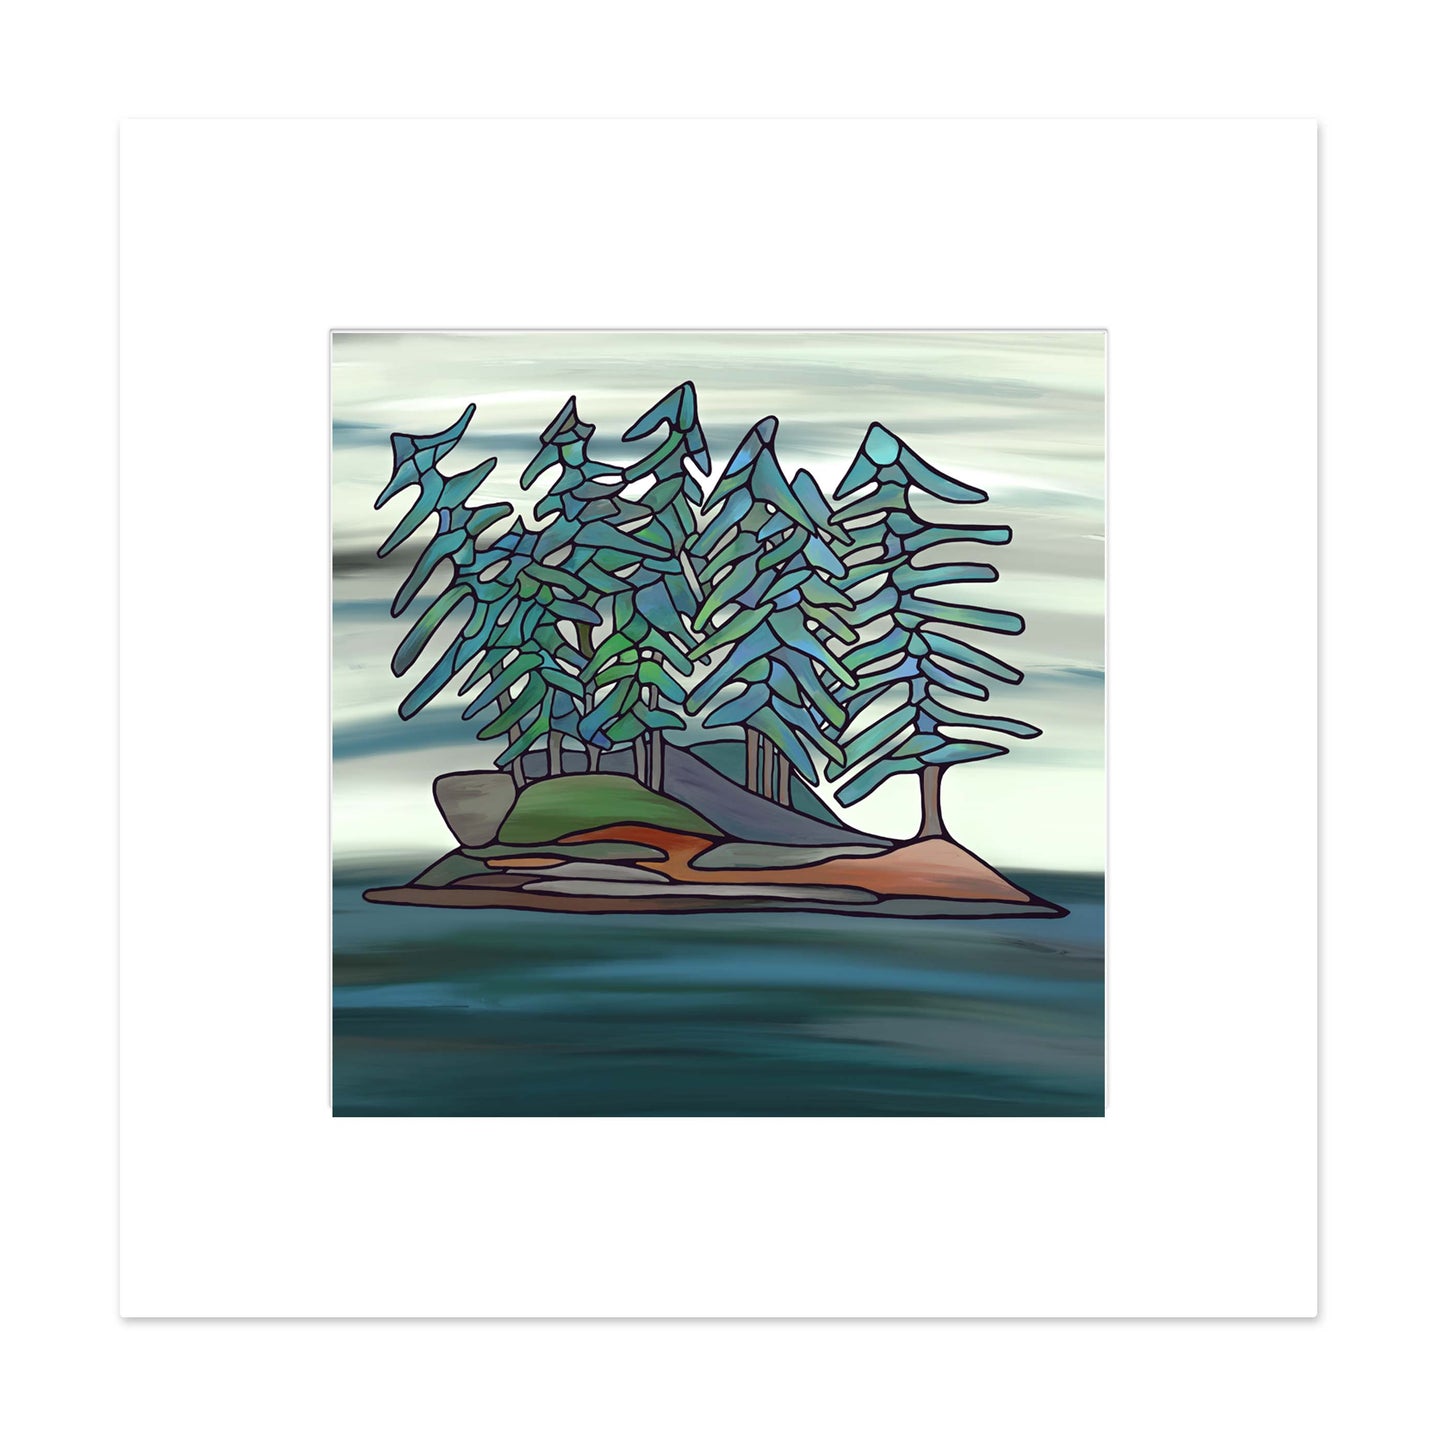 Signed & Matted Print - Little Island